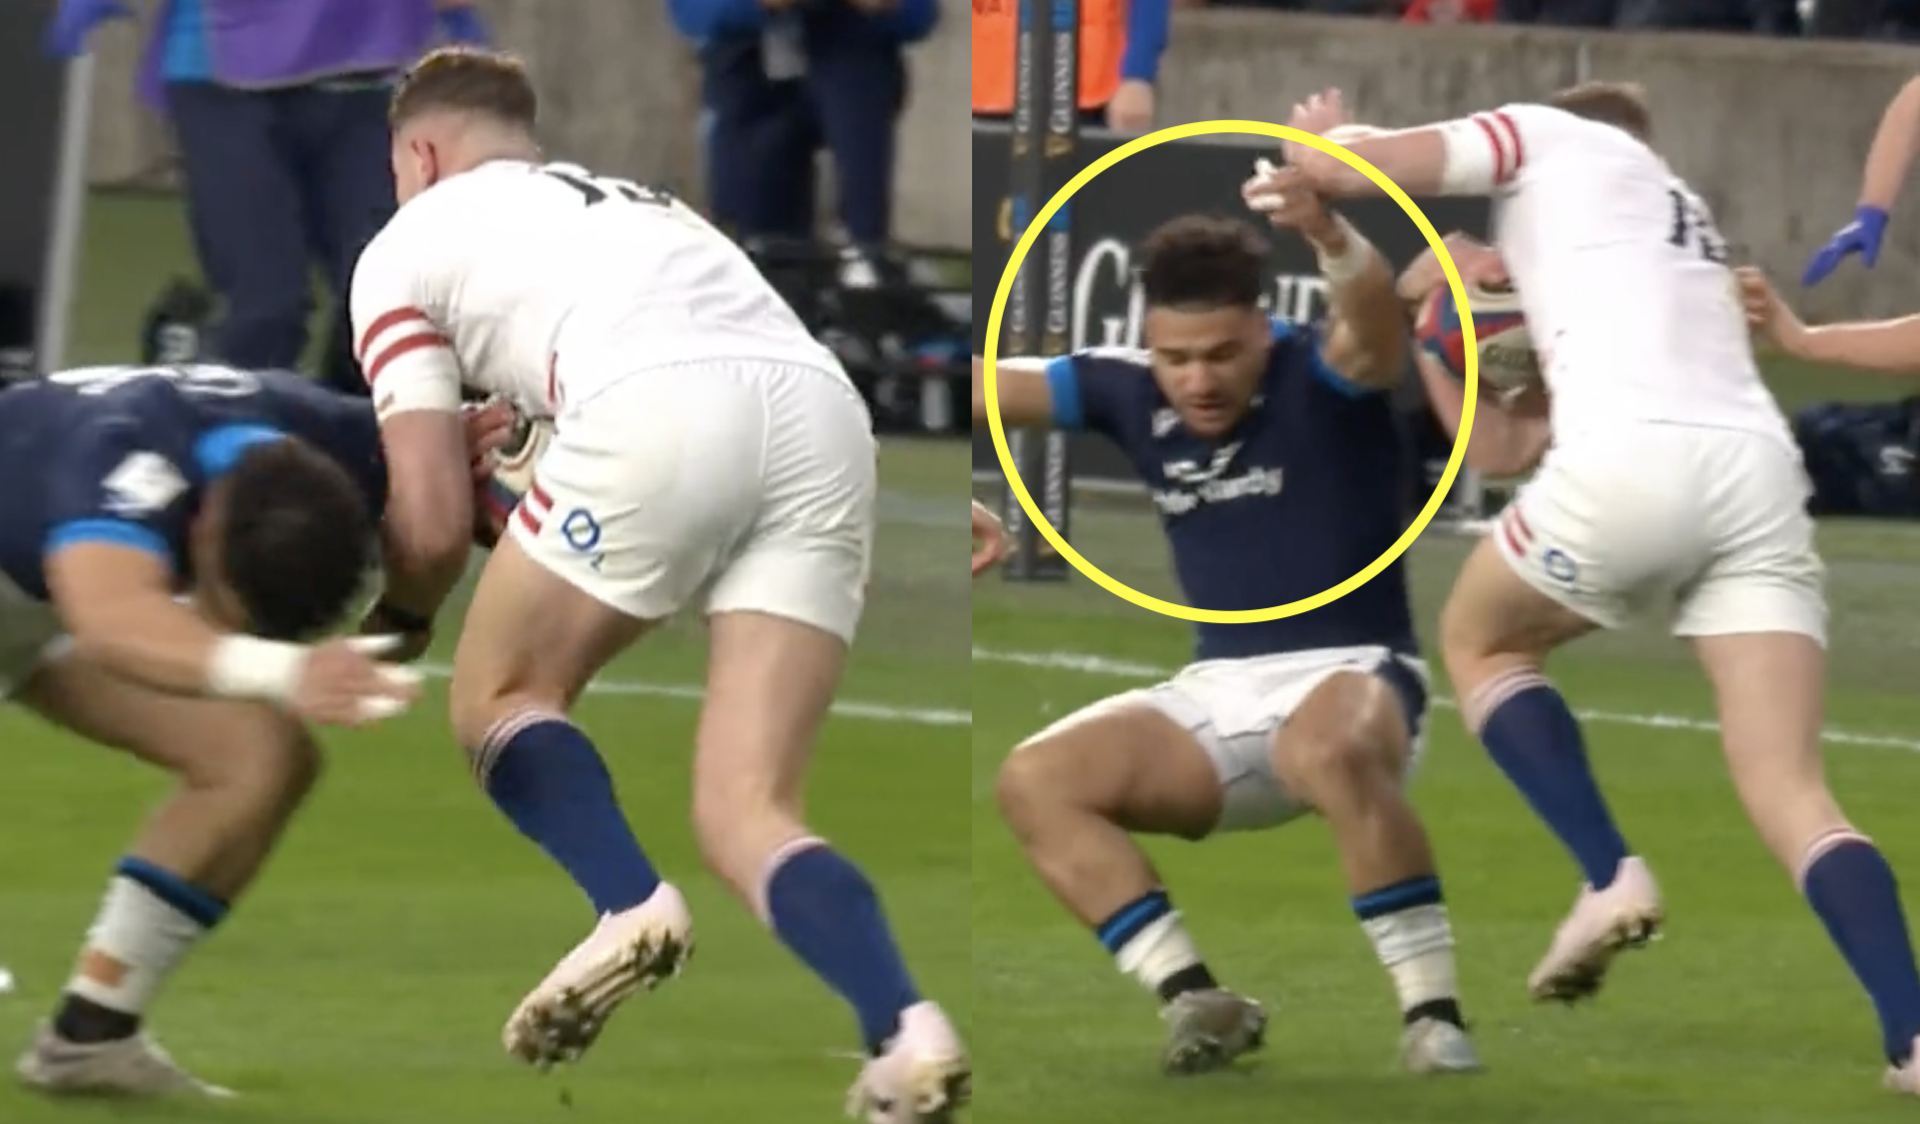 England fullback sends 104kg Tuipulotu flying in manic carry